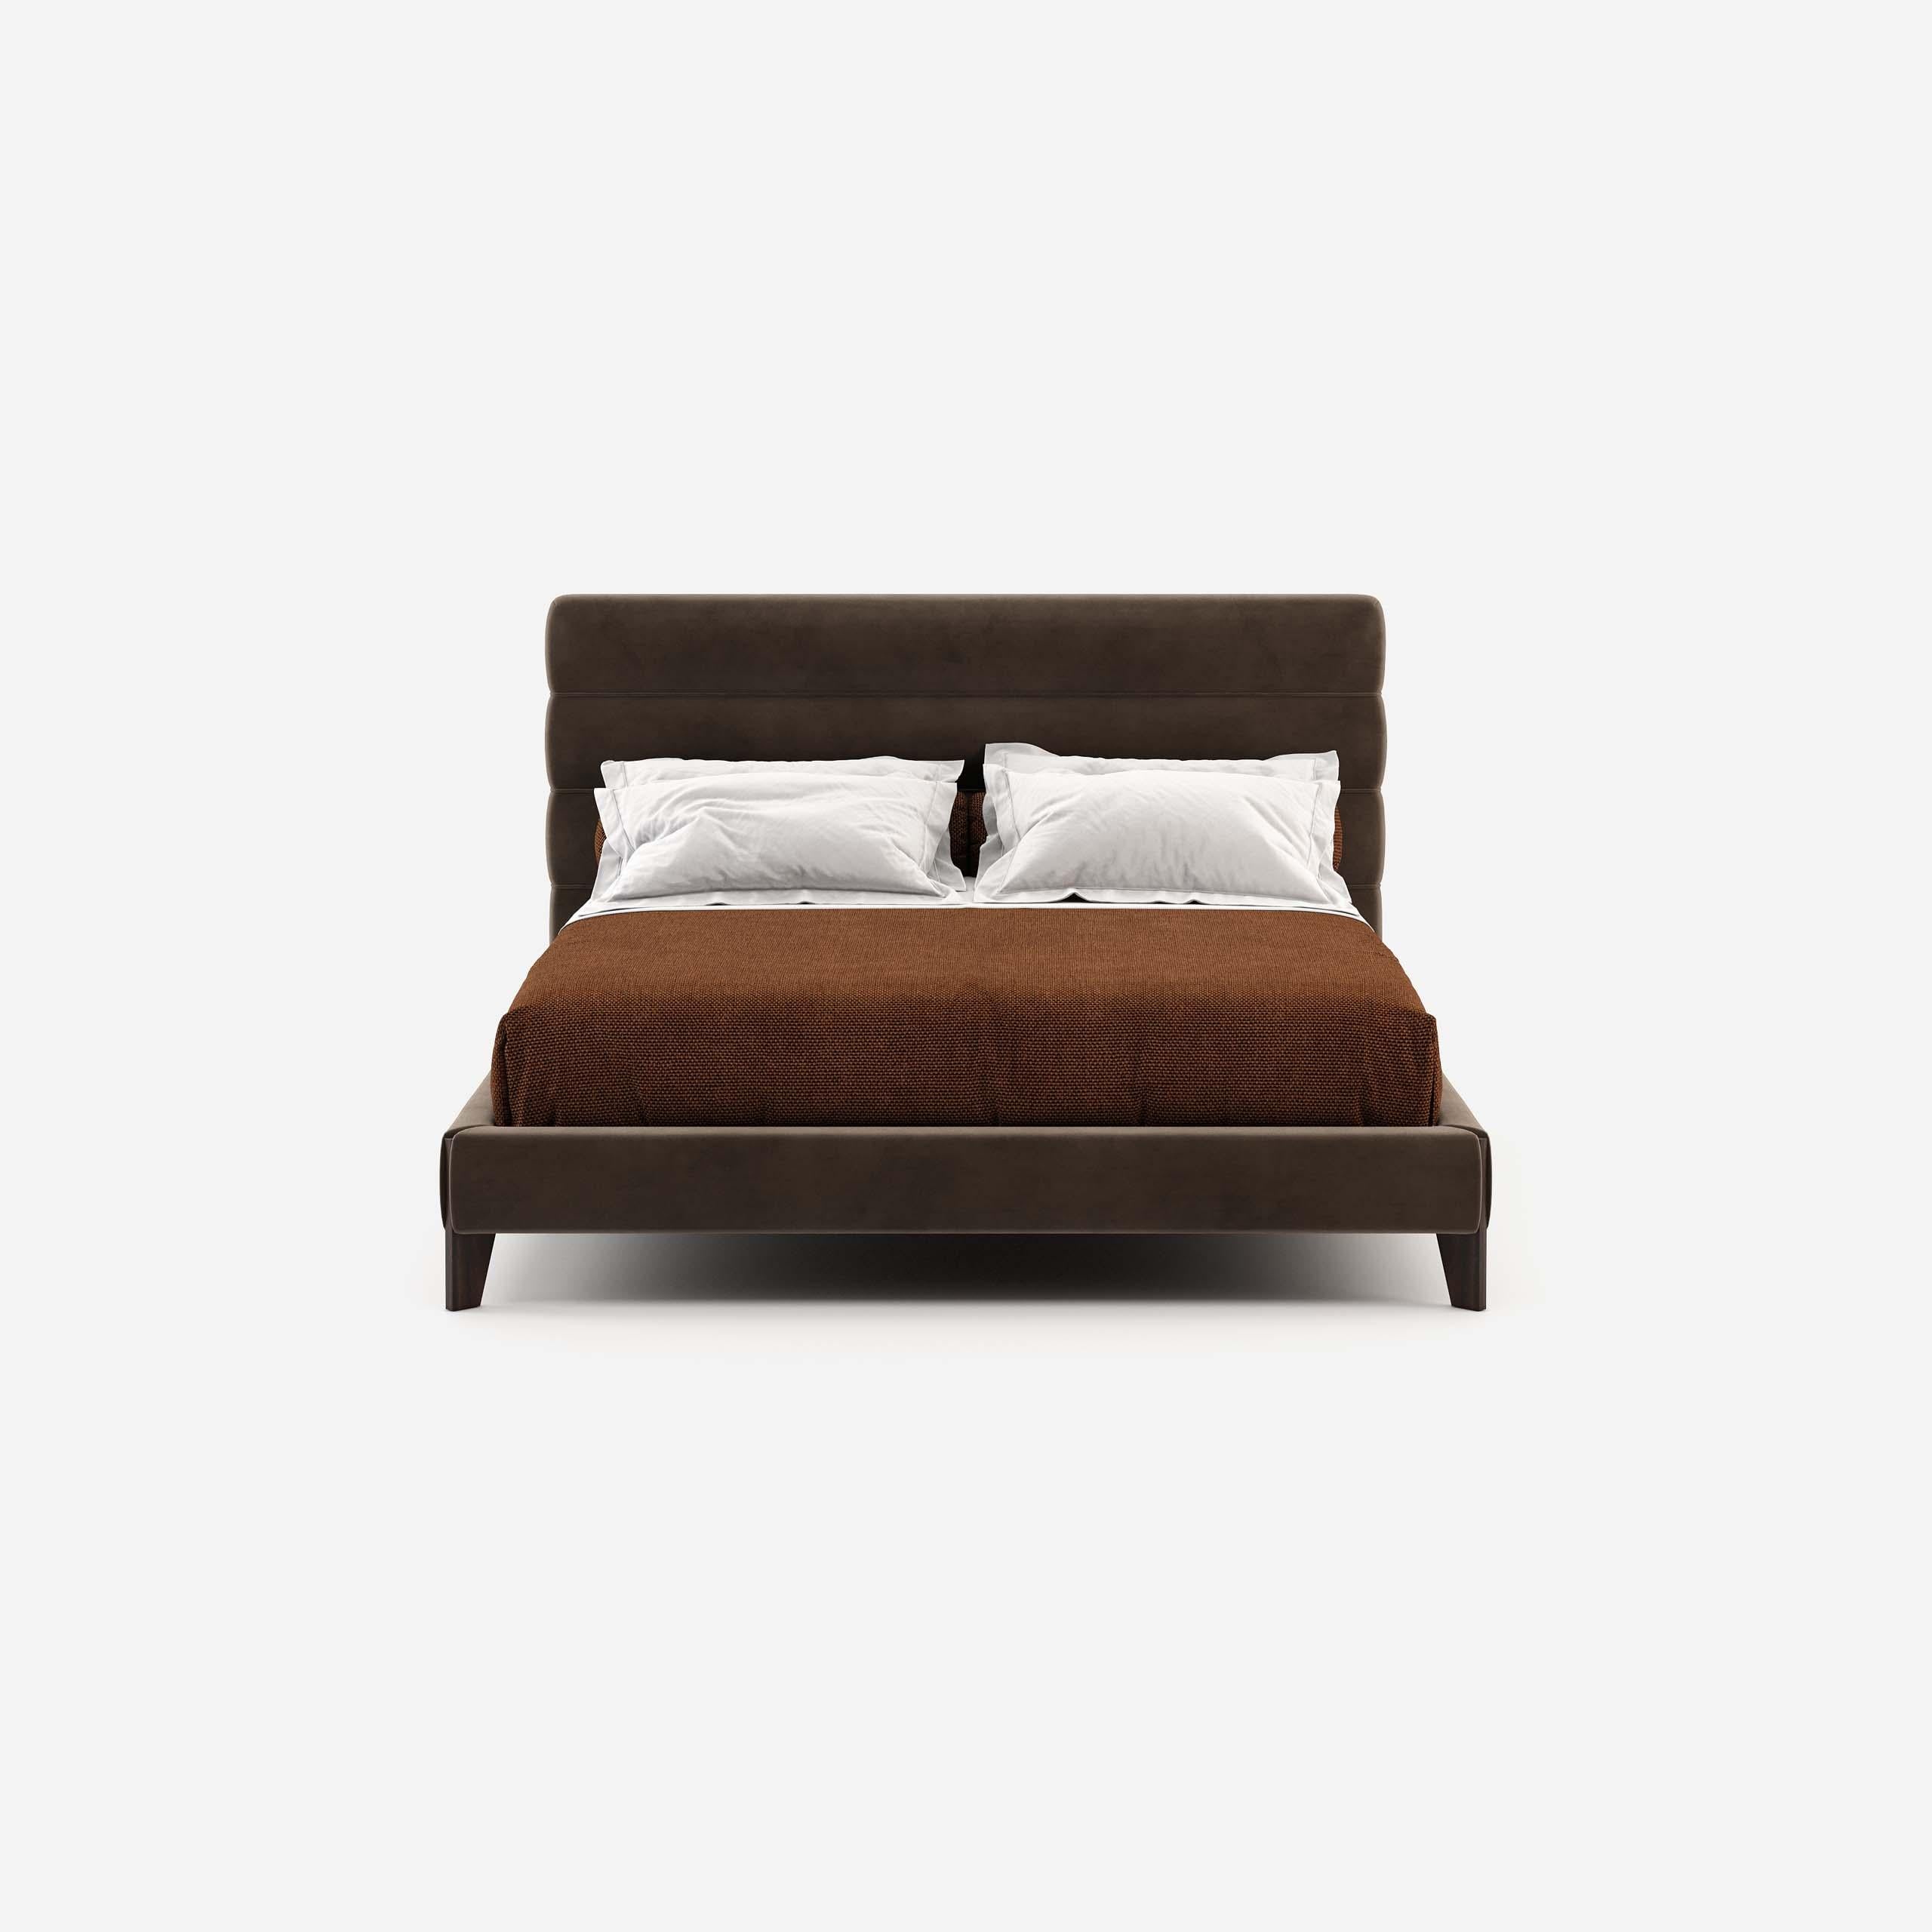 Timeless design suitable for contemporary residential or hotel projects. 
Fabrics: Chocolate velvet
Structure: Matt Smoked Eucalyptus.
Other materials and colors are also possible for this bed , See attached images for finish options and velvet